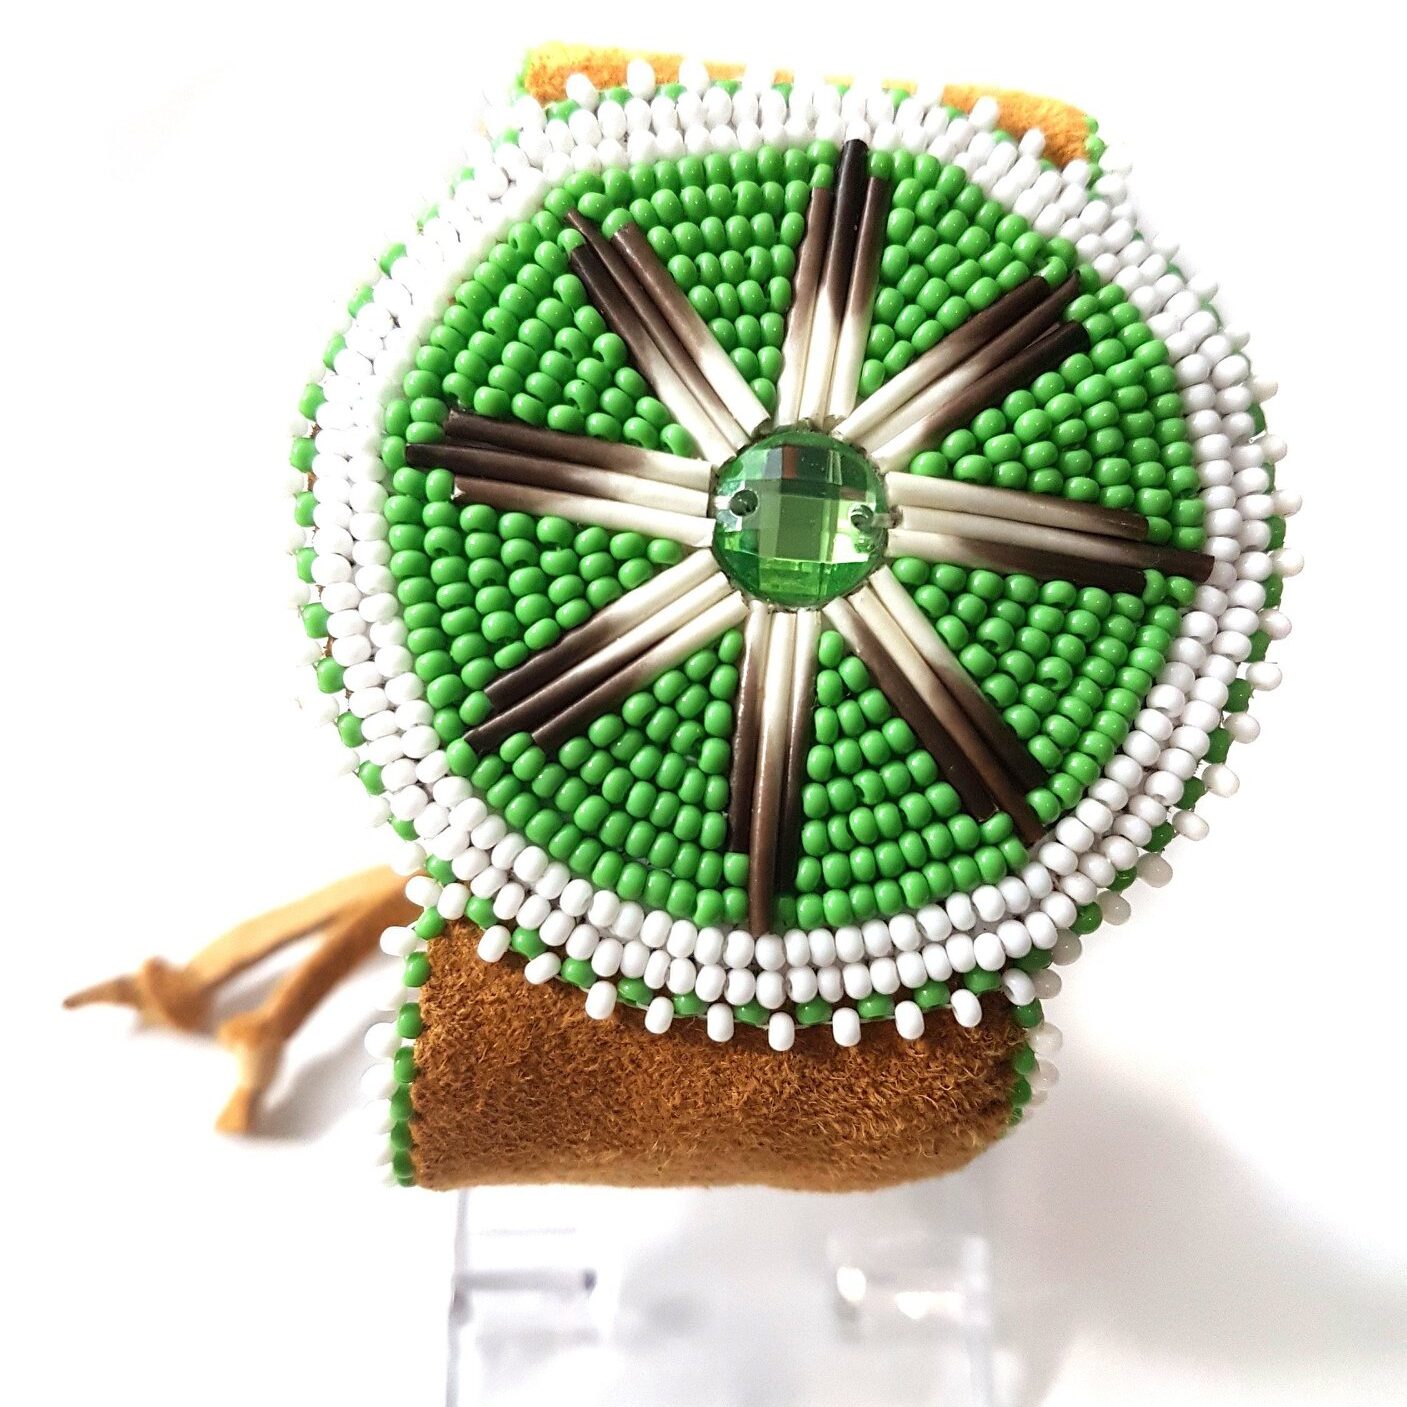 Robin Meise, Indigenous artist, healer, beaded, bead work, crafts, dreamcatcher, medicine bags, medicines, featherwork, natural, first nations, indigenous arts collective of canada, pass the feather, indigenous art, aboriginal art, indigenous art directory